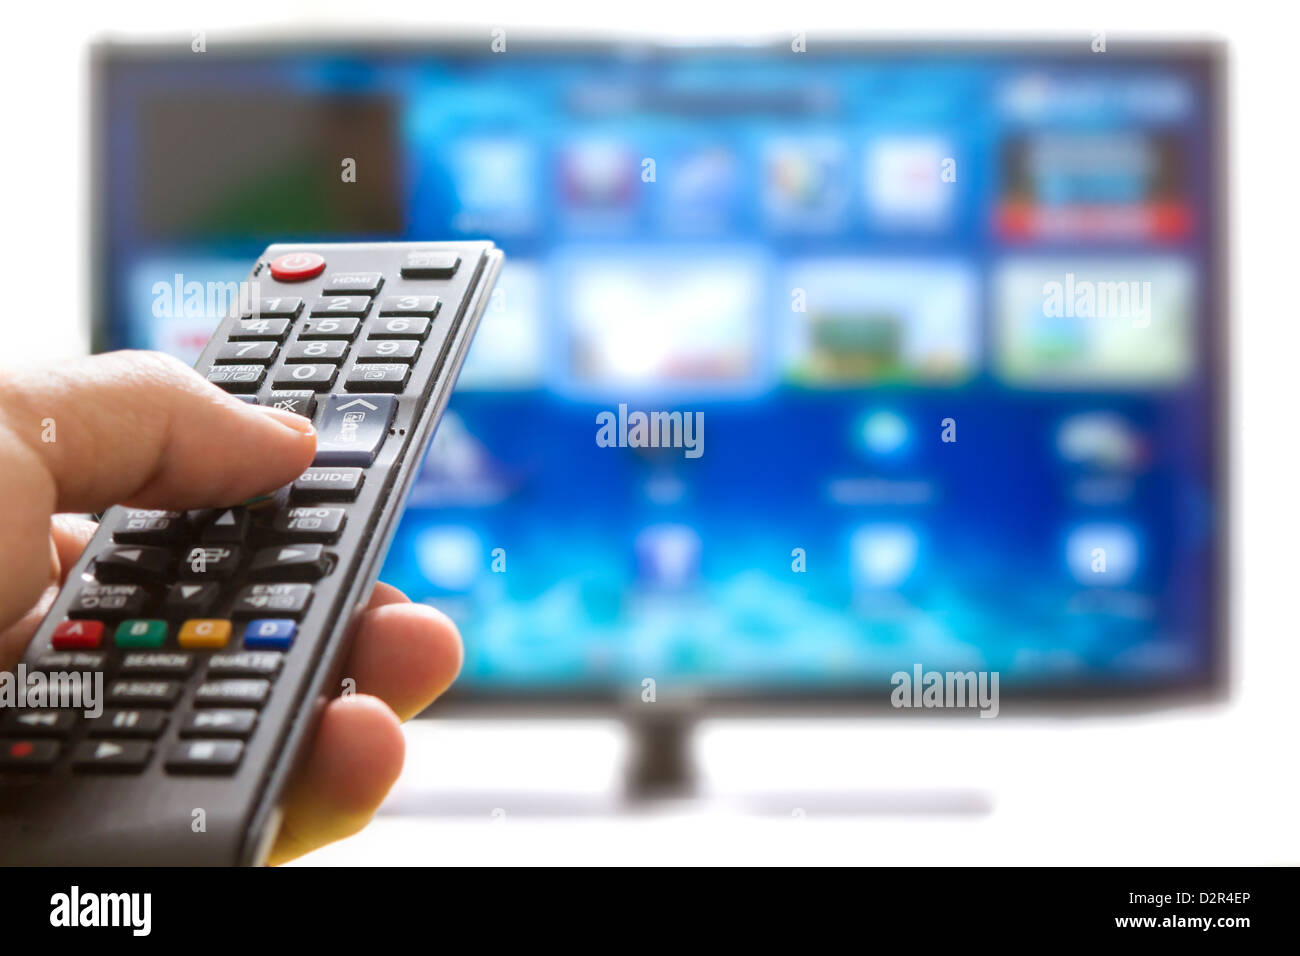 Television remote control changes channels thumb on the blue TV screen Stock Photo